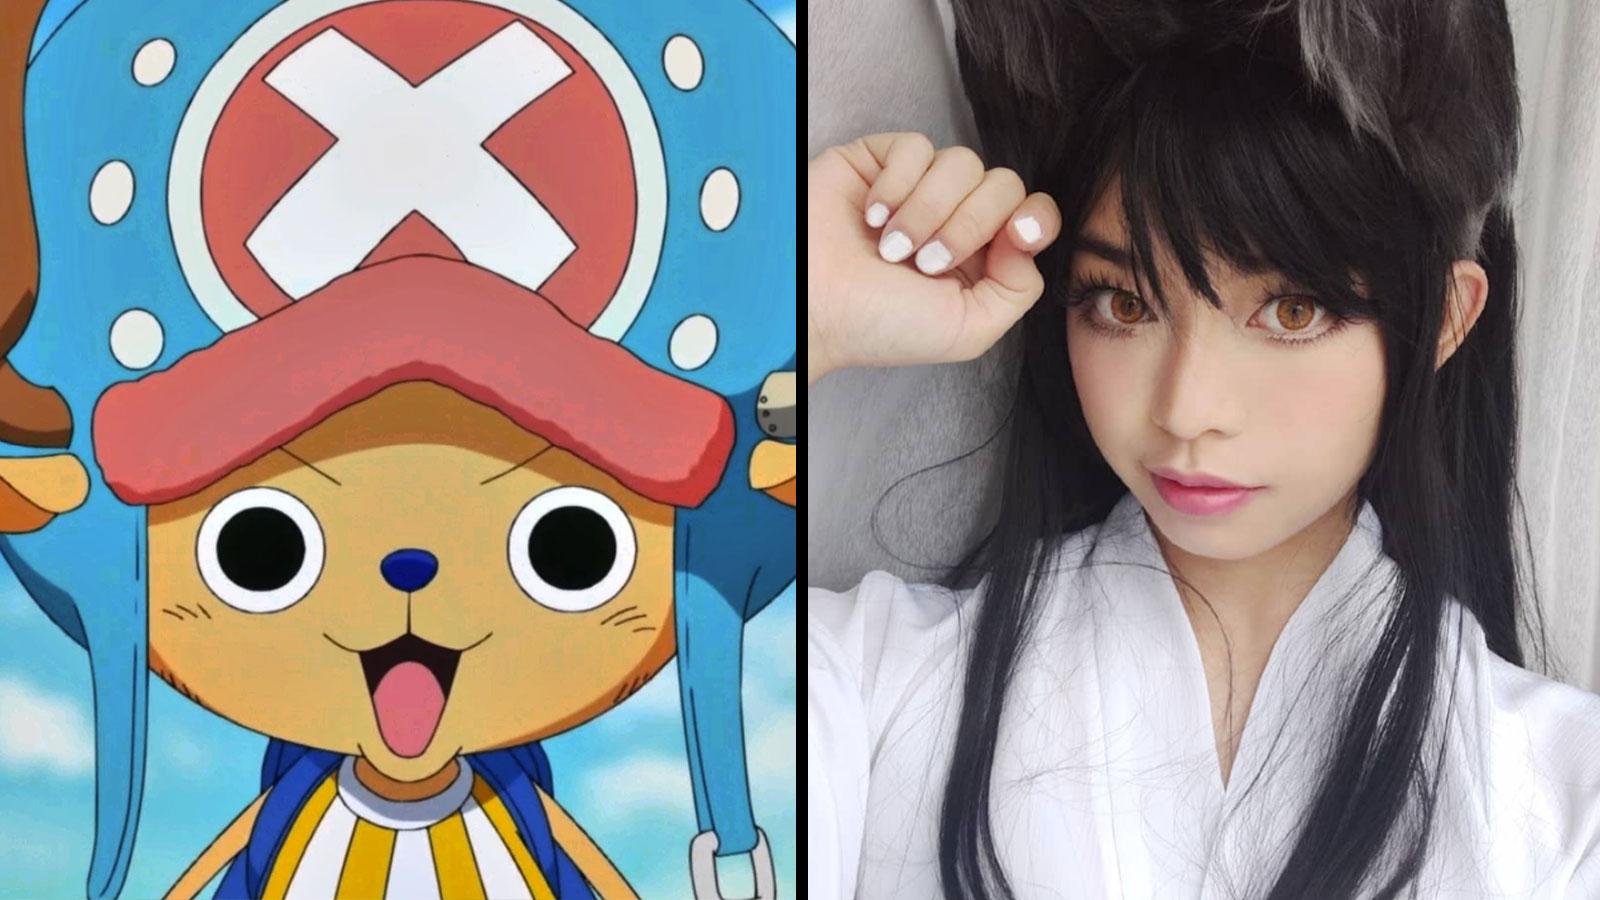 I finally started One Piece and I LOVE IT! Here's my cosplay of my favorite  character Chopper 💗 Instagram: bumble.bees.cosplay : r/OnePiece